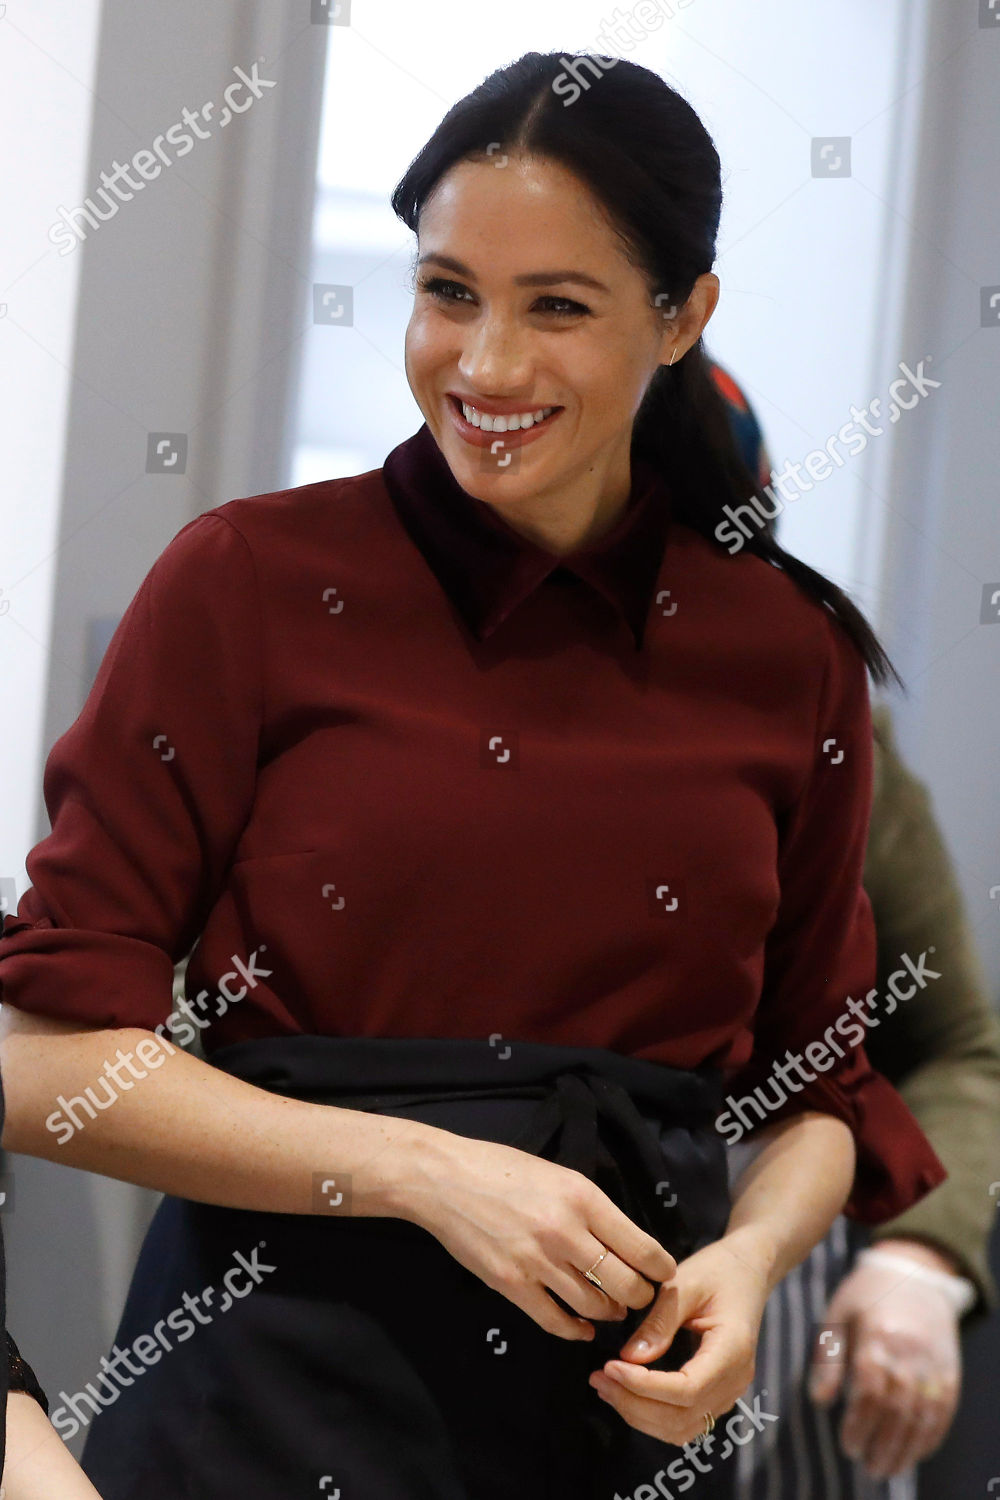 meghan-duchess-of-sussex-visit-to-the-hubb-community-kitchen-london-uk-shutterstock-editorial-9988987ab.jpg